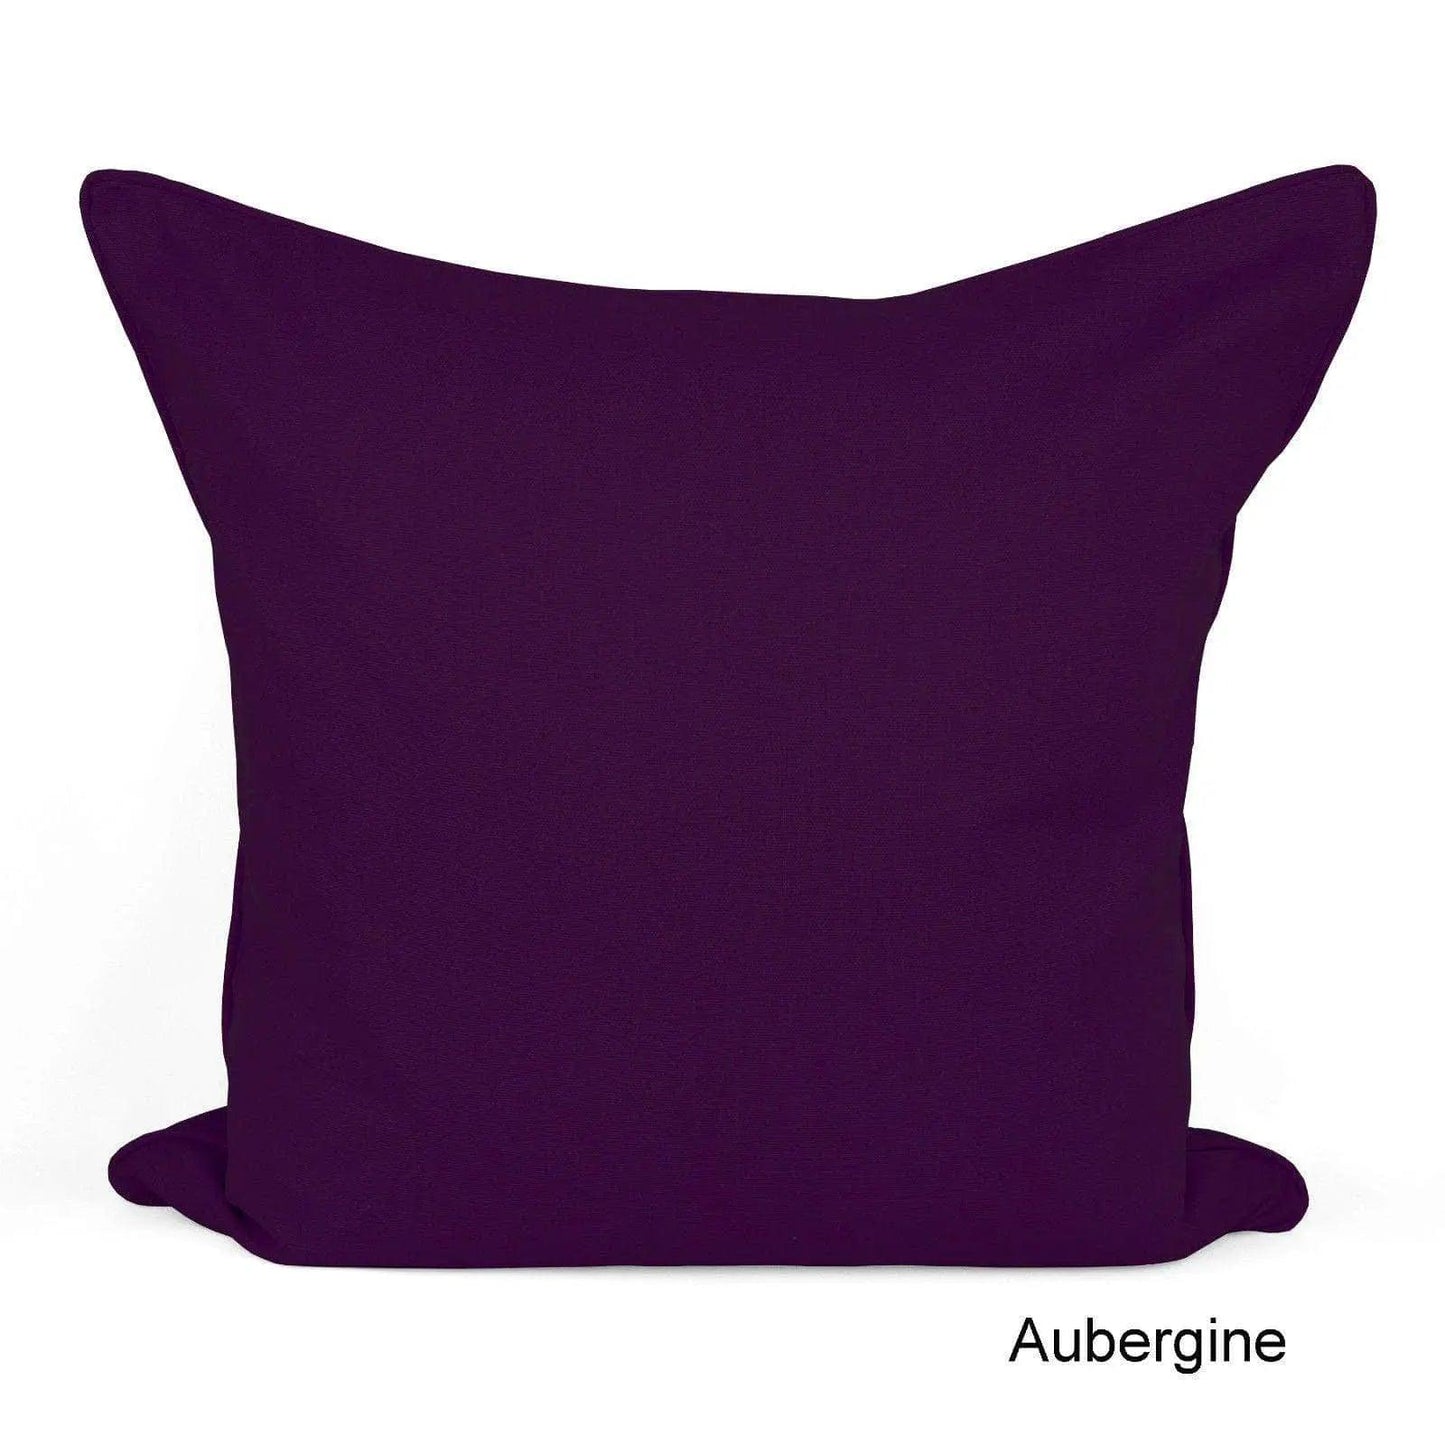 a purple pillow sitting on top of a white floor